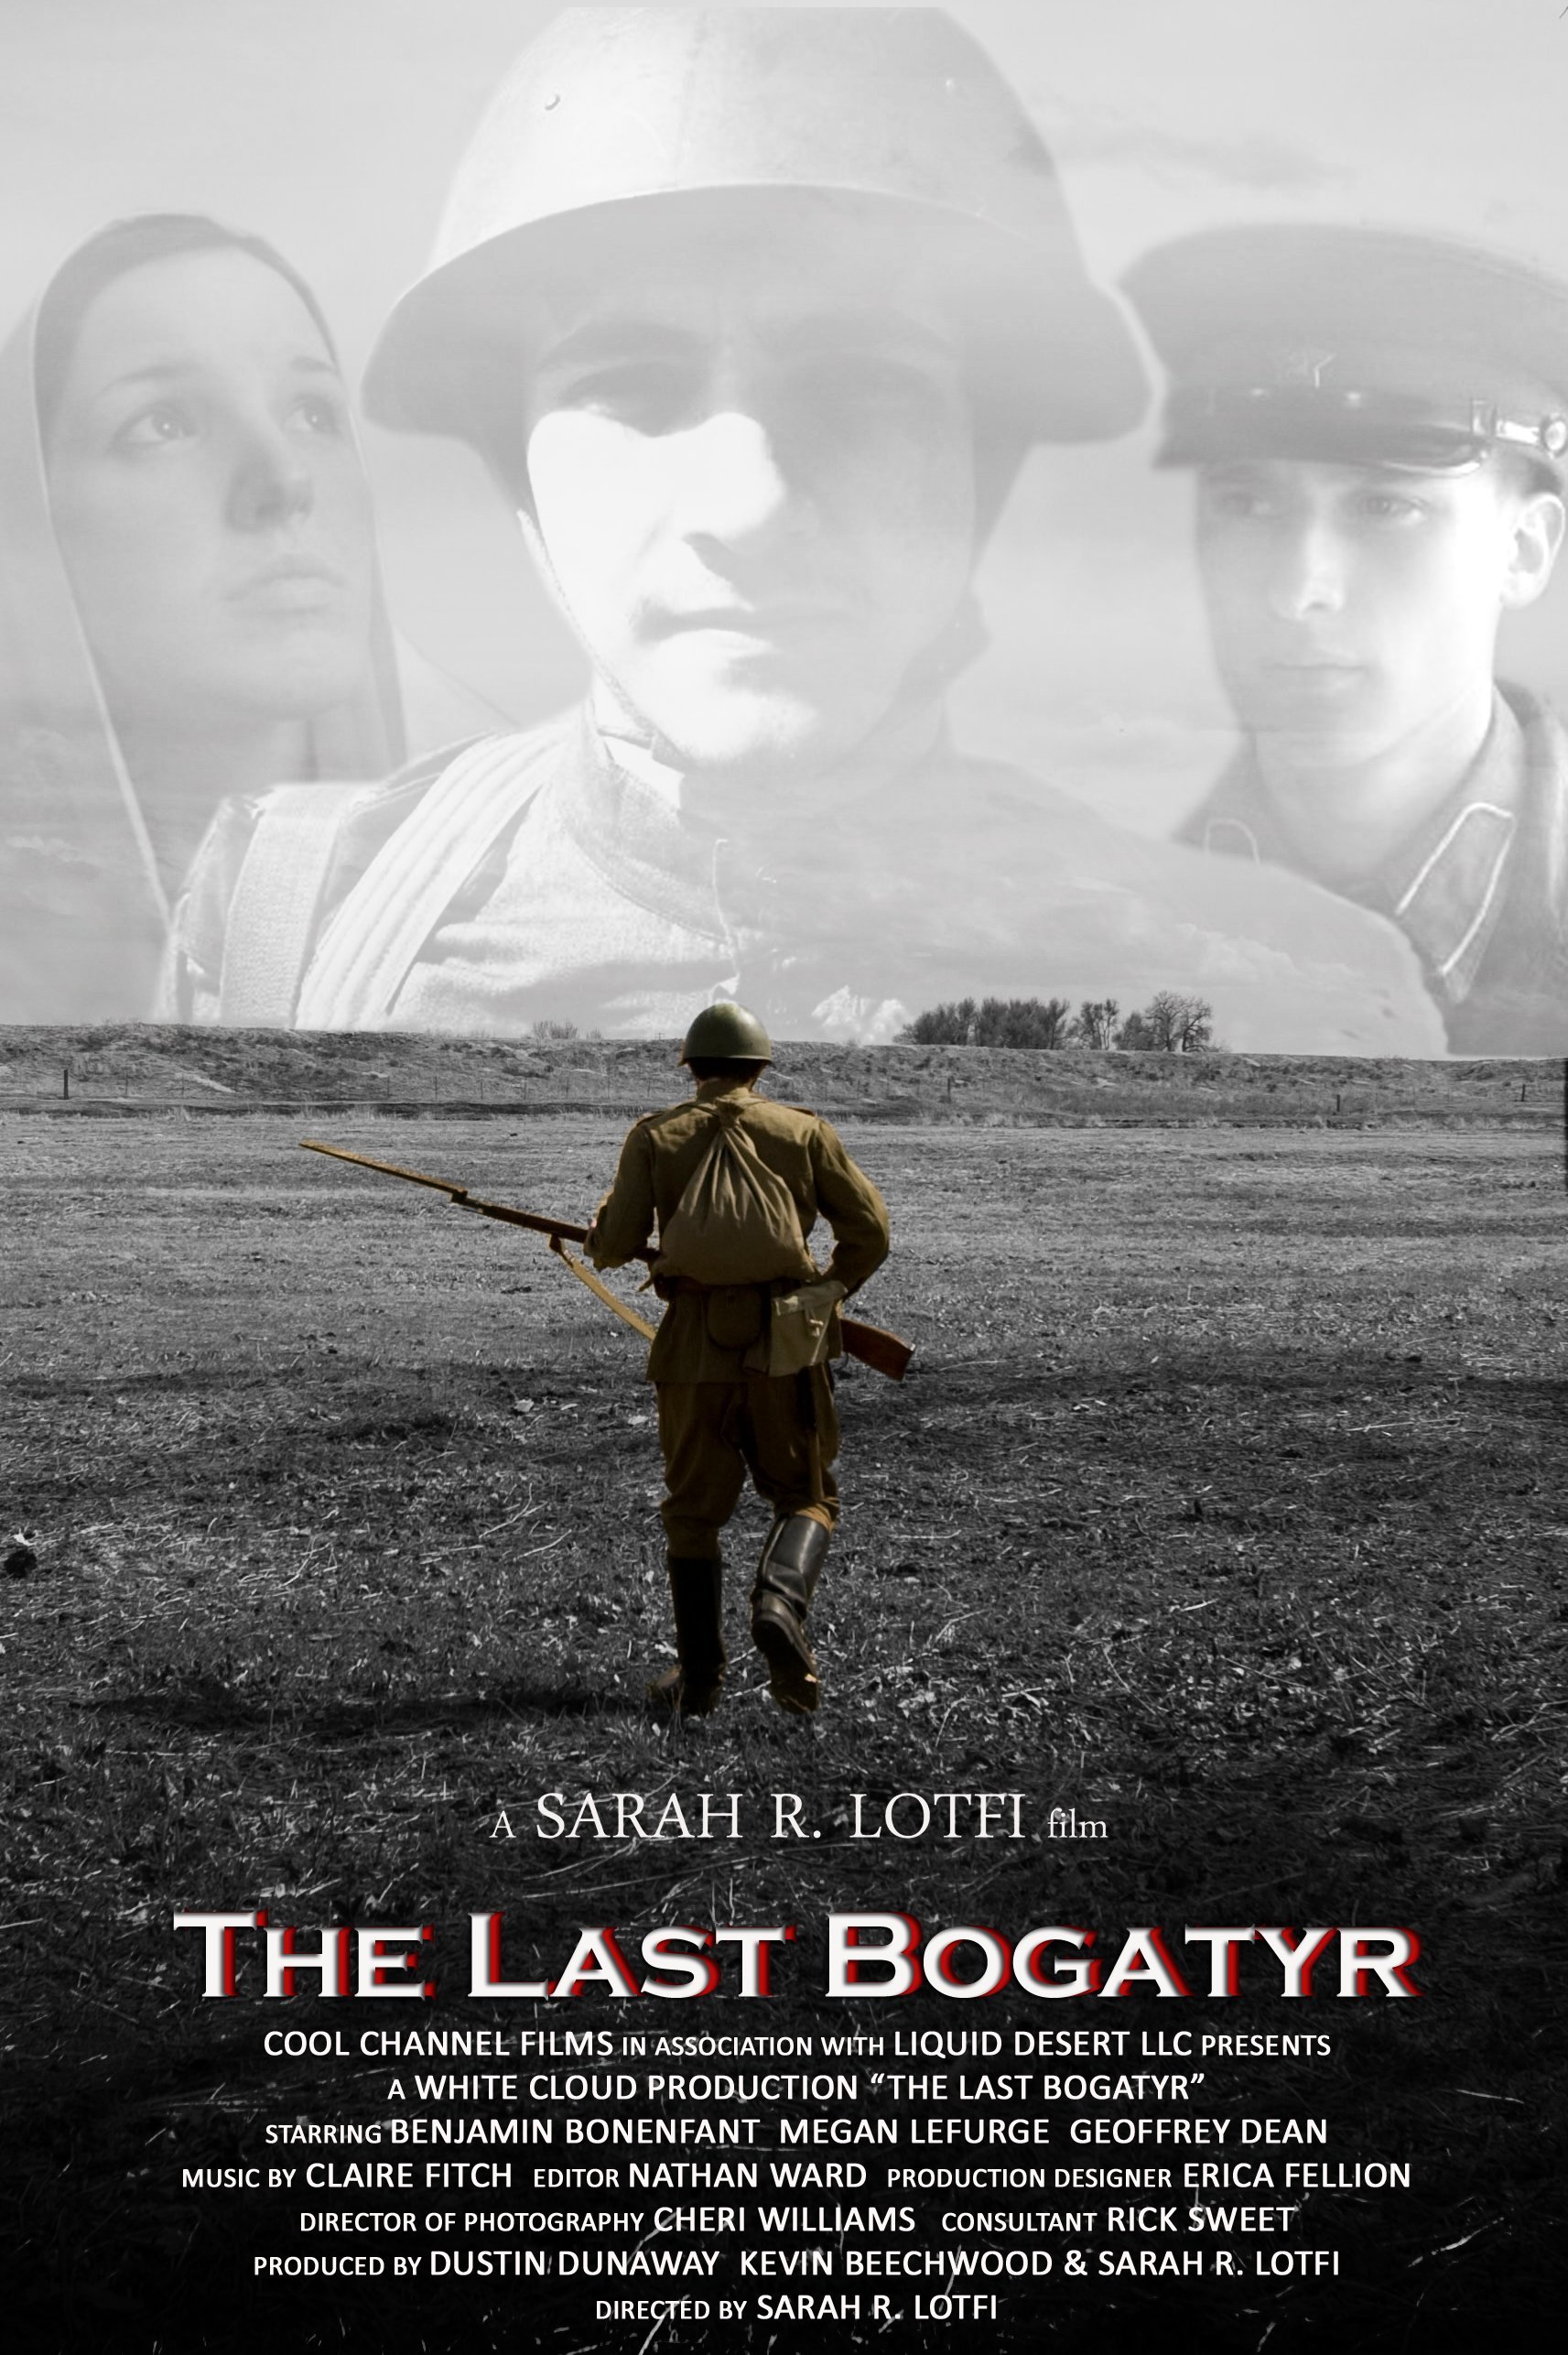 The official movie poster for The Last Bogatyr. Design by Dustin Dunaway